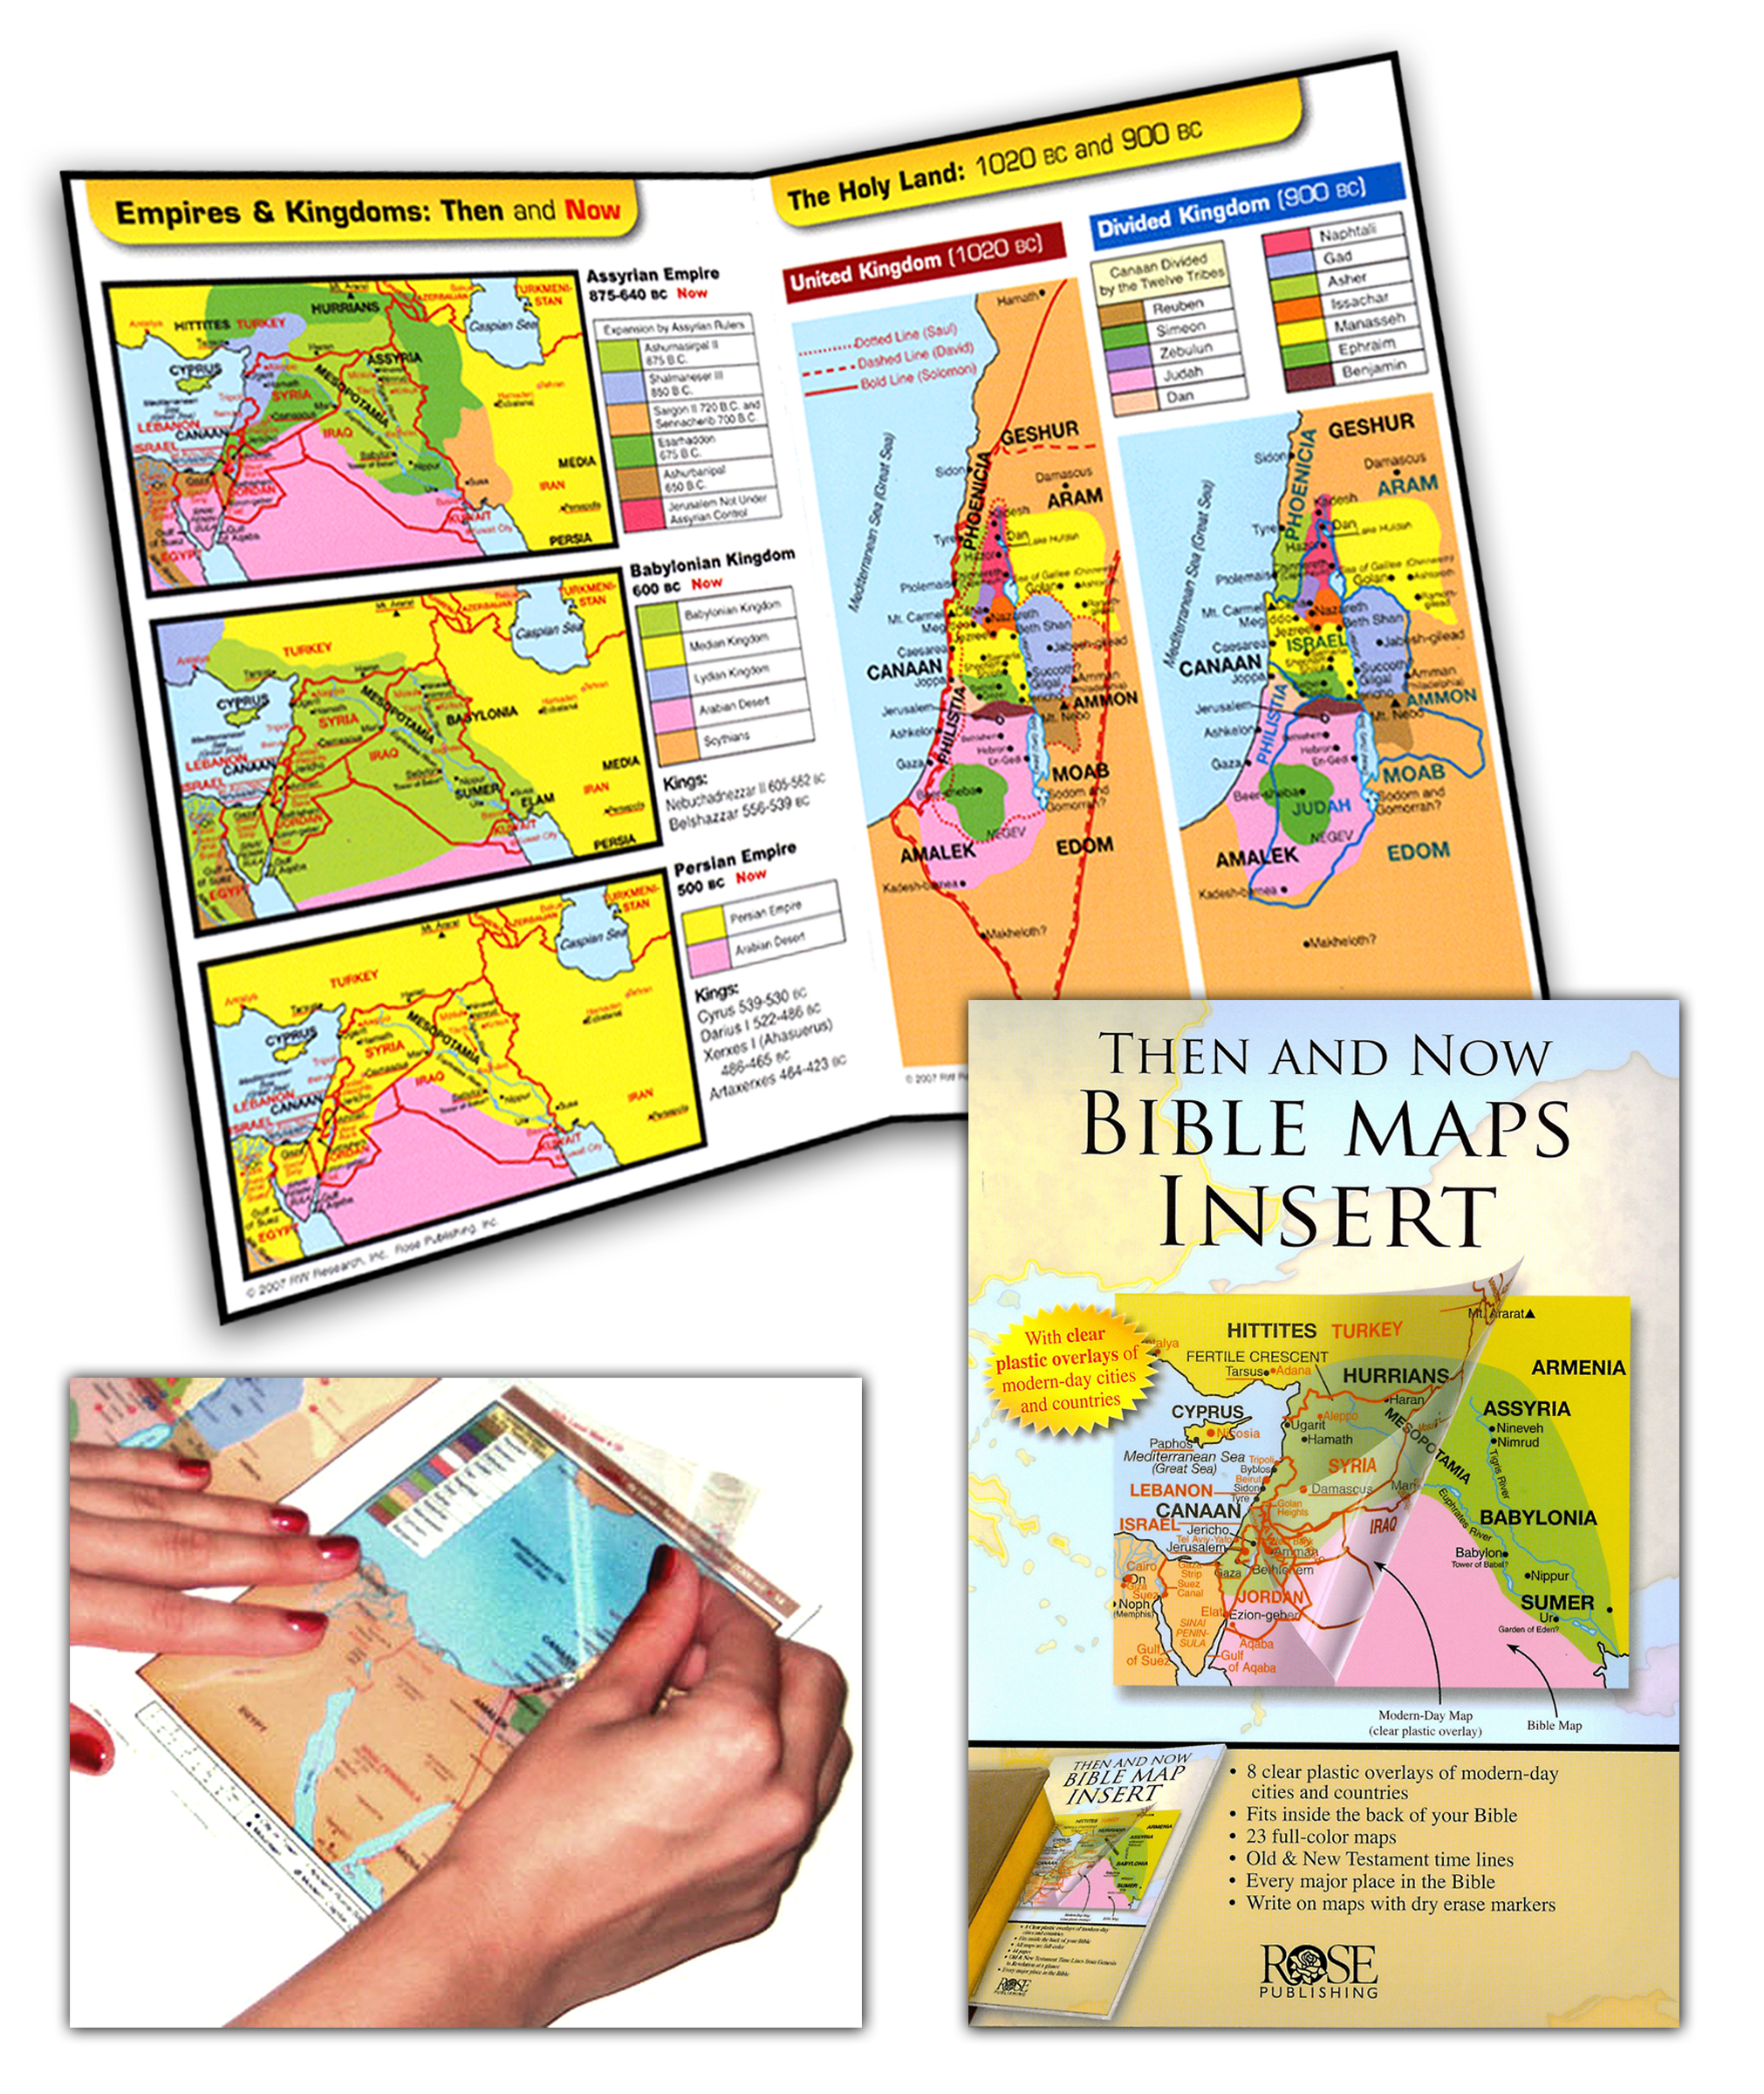 The Baker Book Of Bible Charts Maps And Timelines